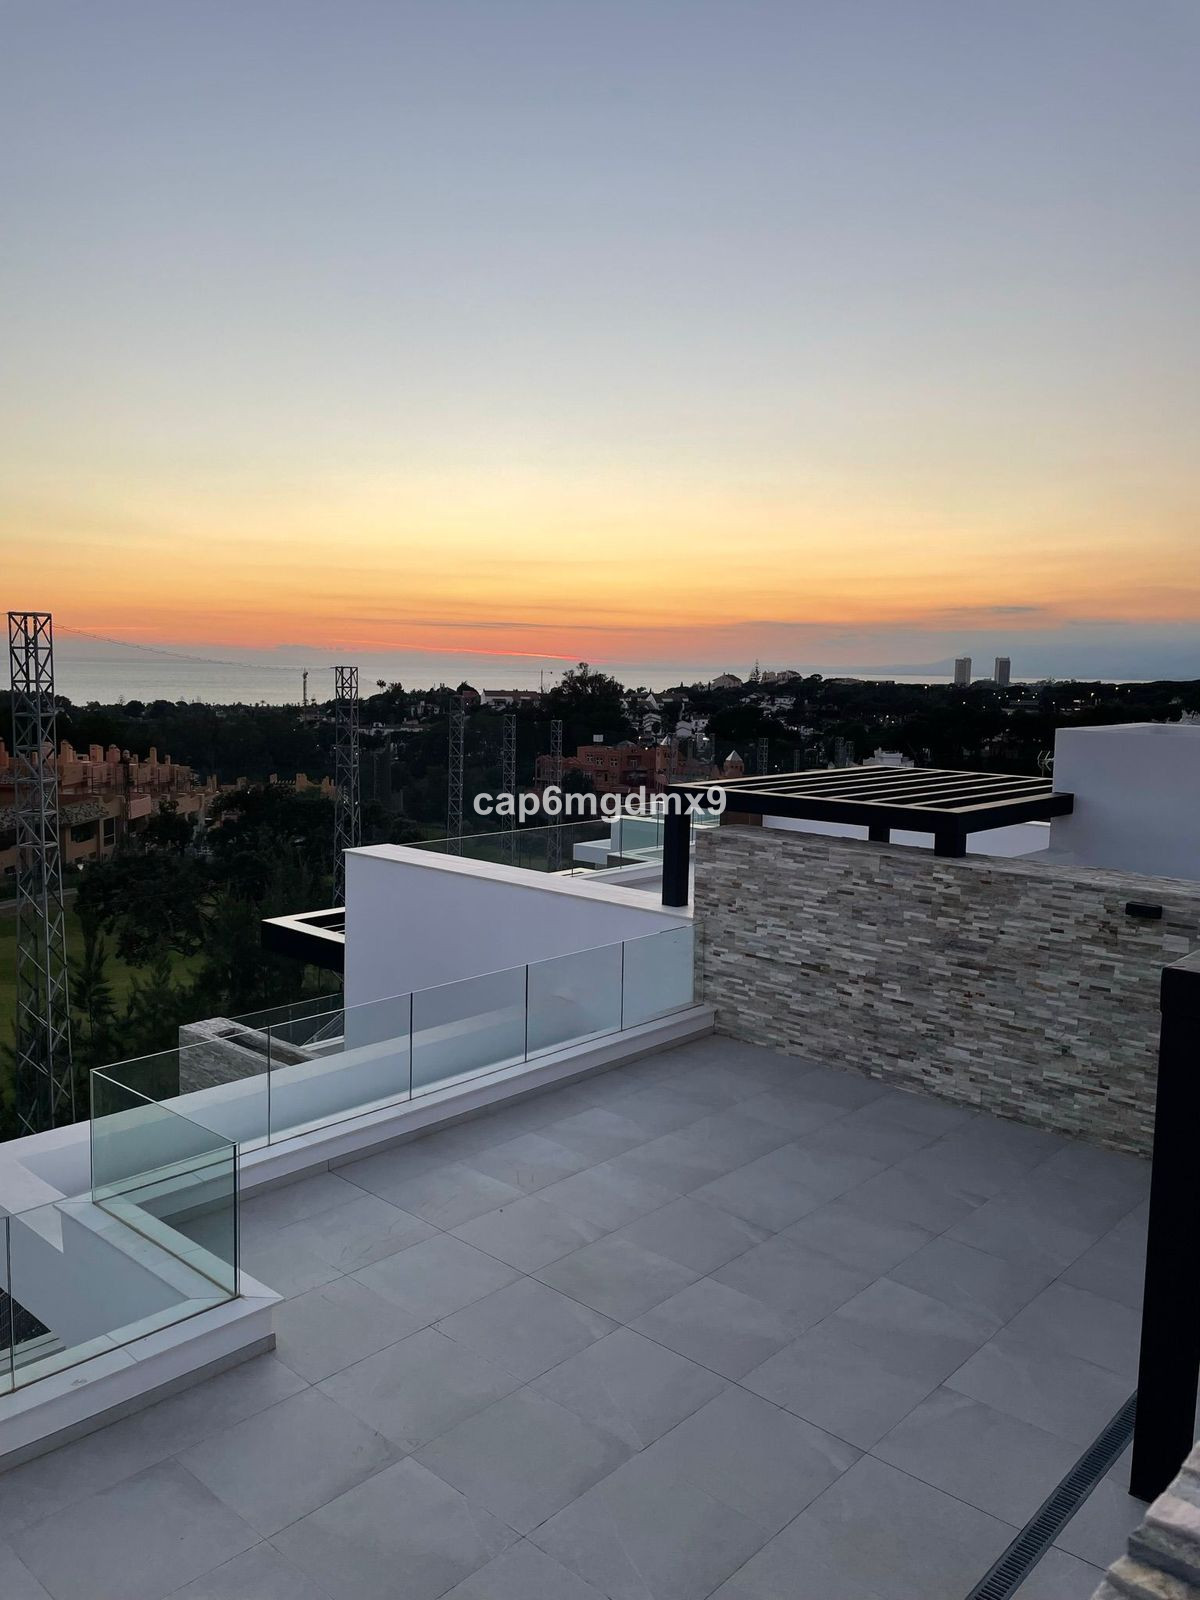 						Apartment  Penthouse Duplex
																					for rent
																			 in Cabopino
					